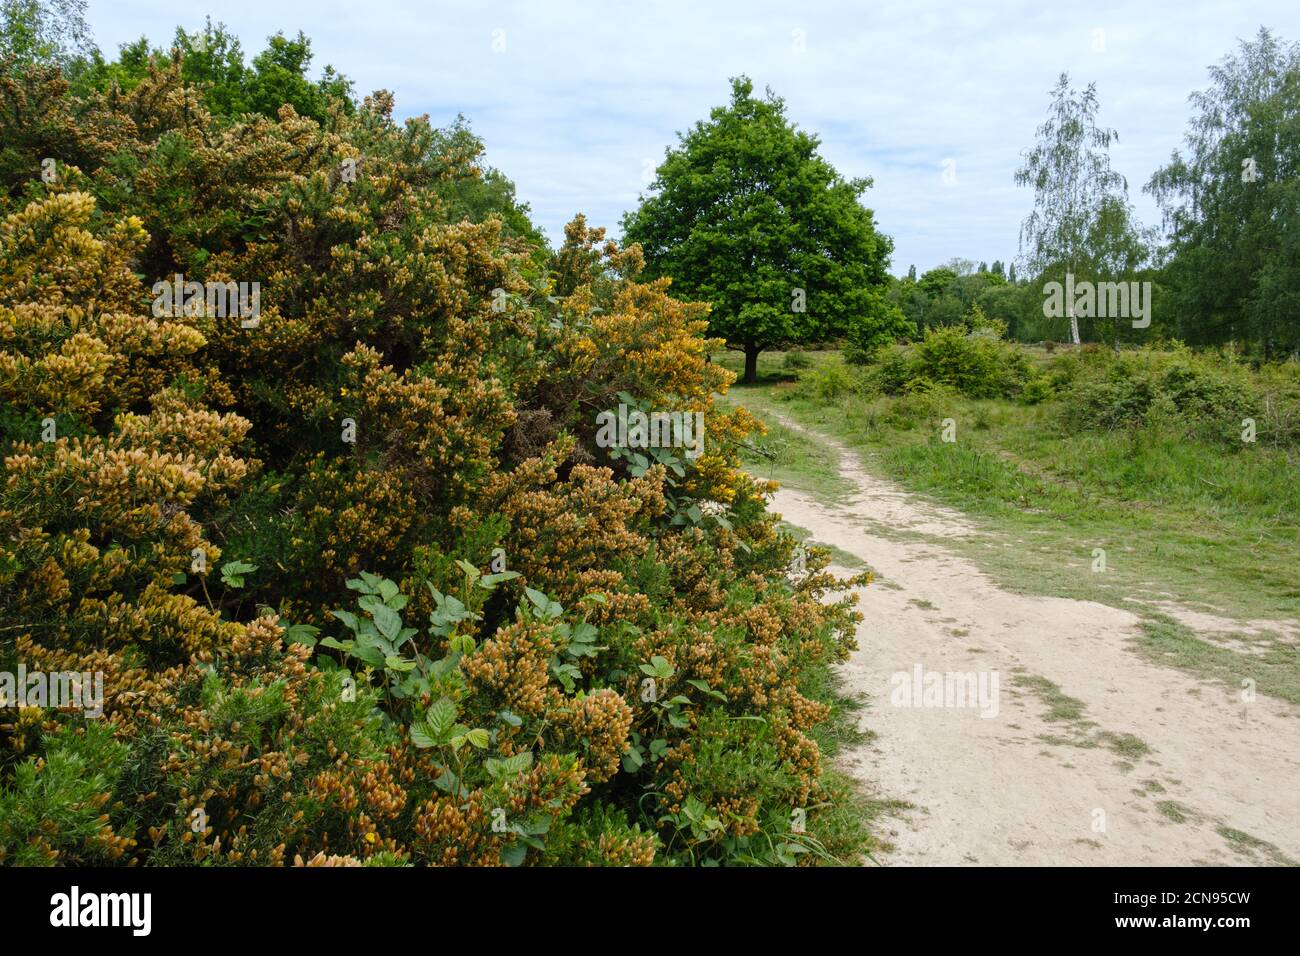 Gorse flower bush in right foreground with dirt path leading to trees, grass and fields at Ruislip Woods Nature Preserve, Northwest London, England. Stock Photo